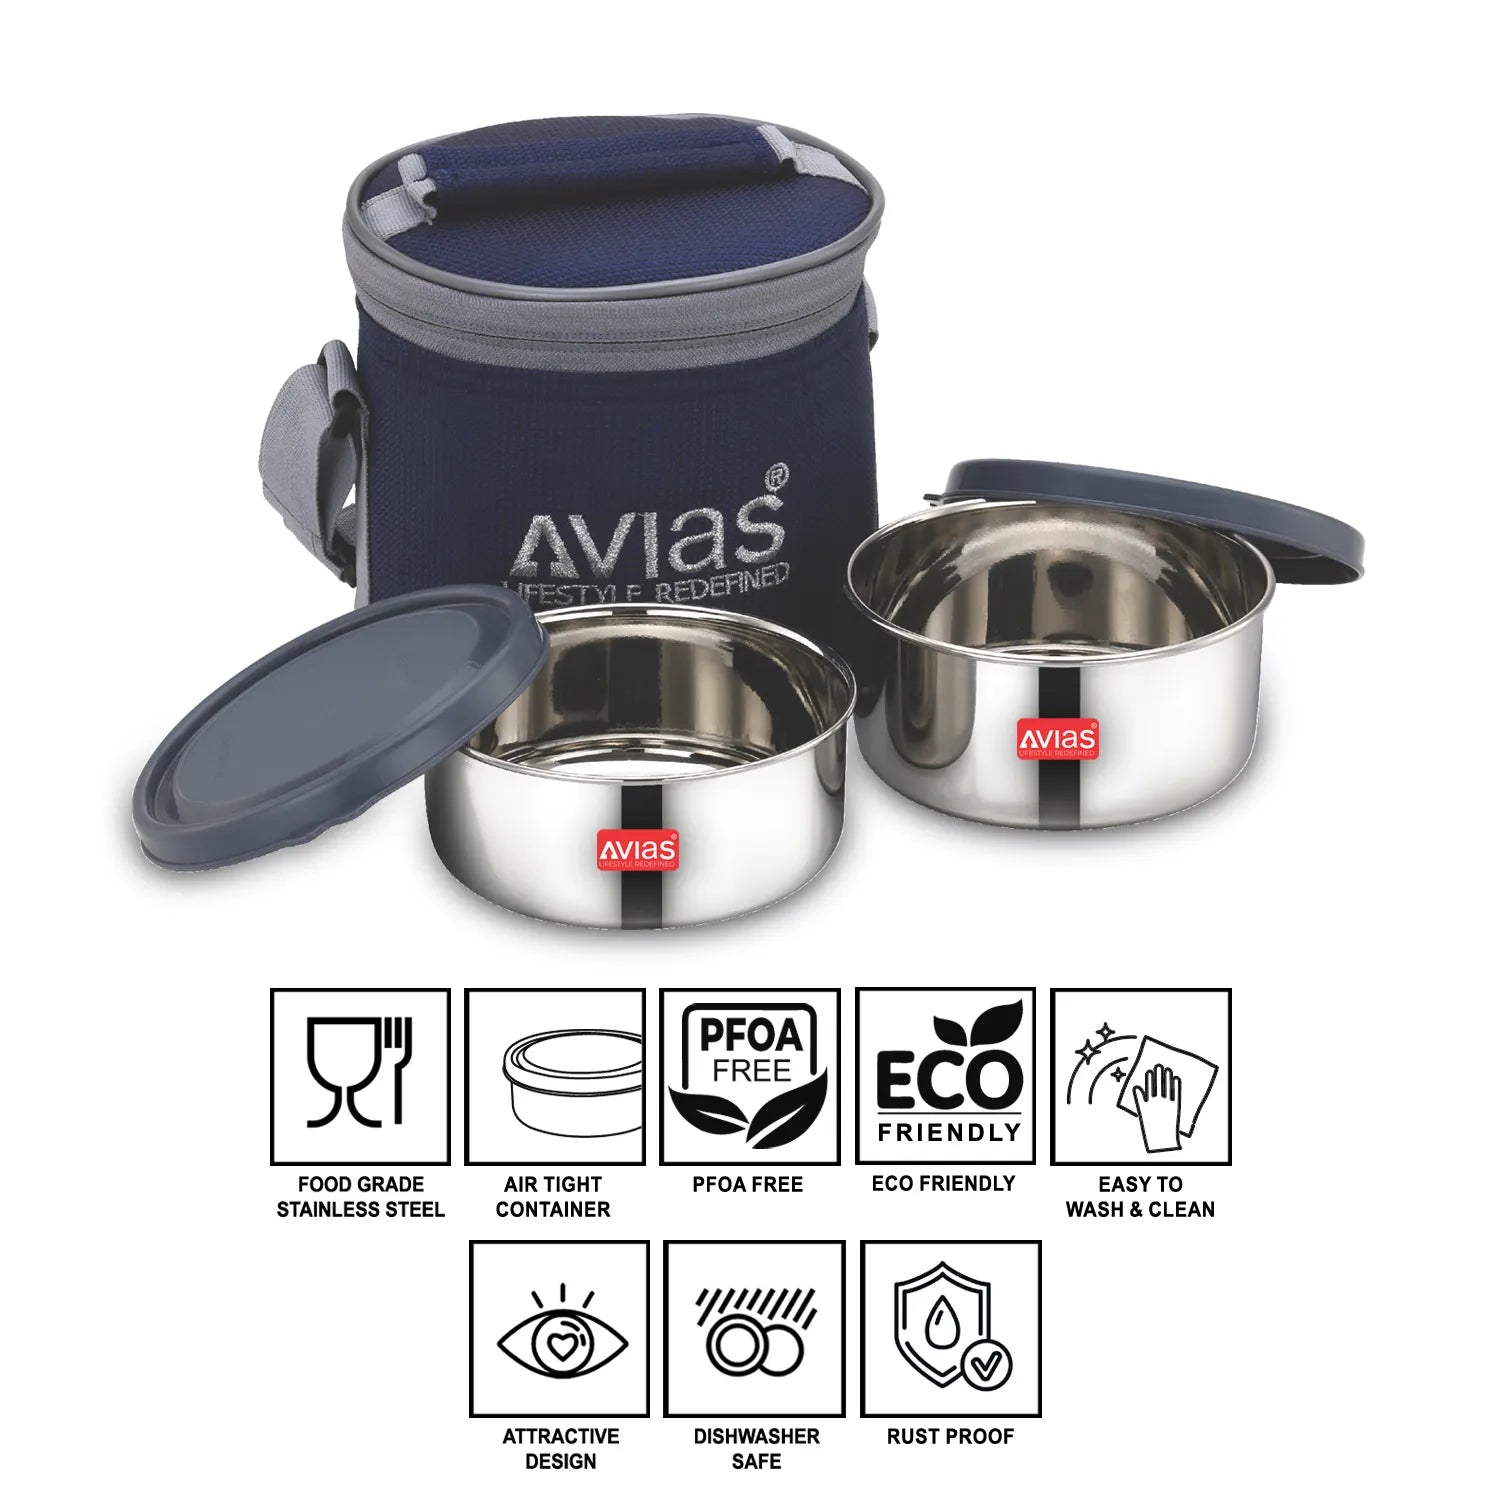 AVIAS Freshia stainless steel lunch/ tiffin box features